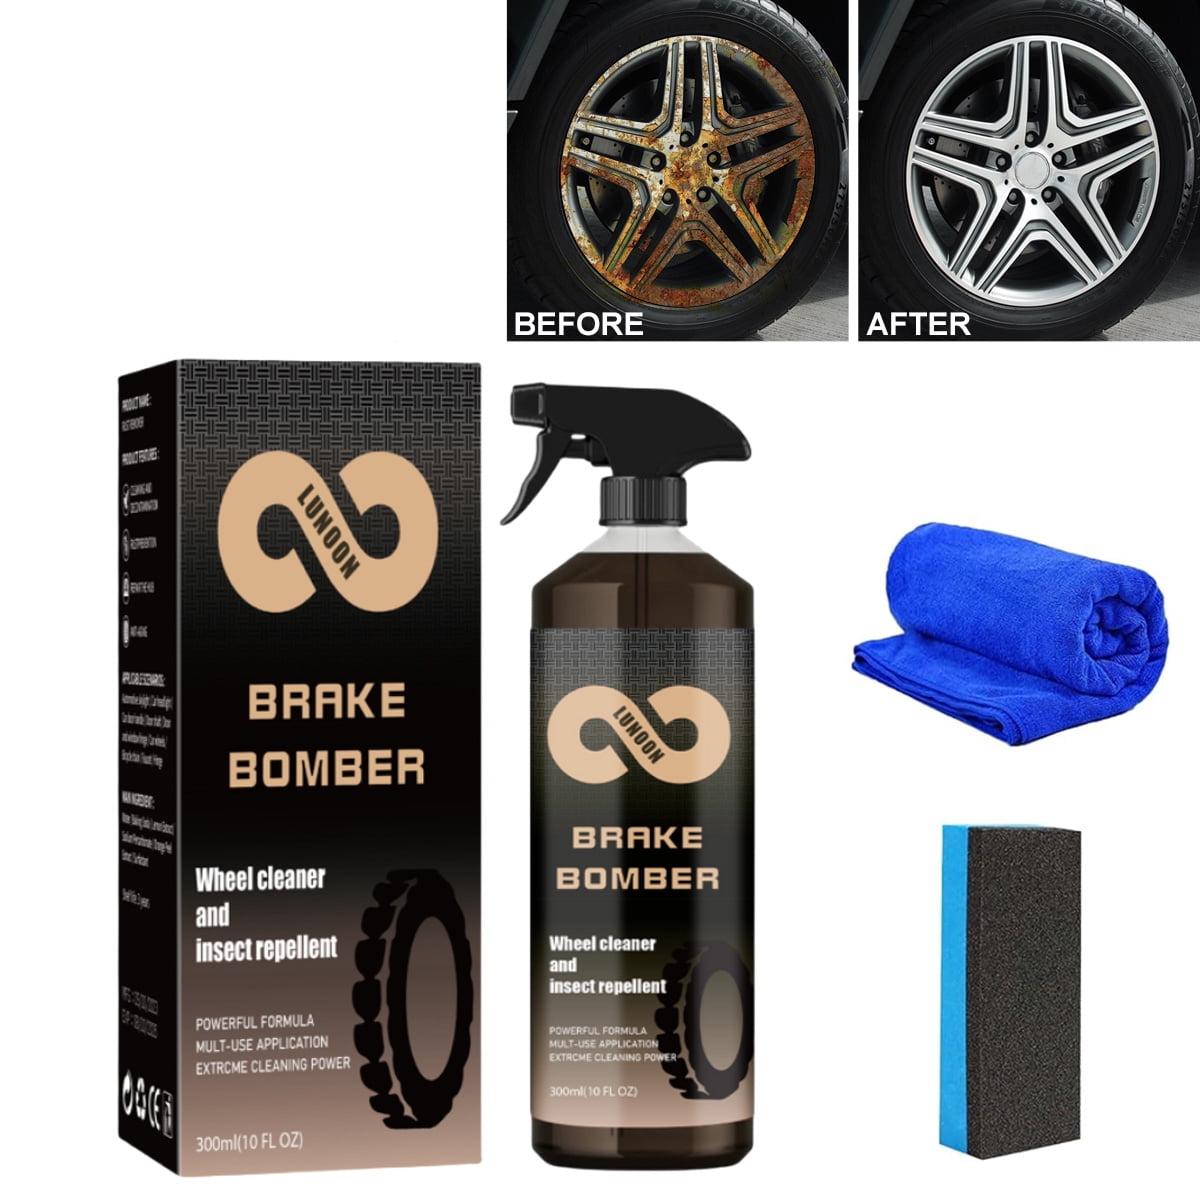 Brake Bomber Wheel Cleaner, Non-Acid Truck & Car Wheel Cleaner Spray and  Bug Remover, Perfect for Cleaning Wheels and Tires, Safe on Alloy, Chrome